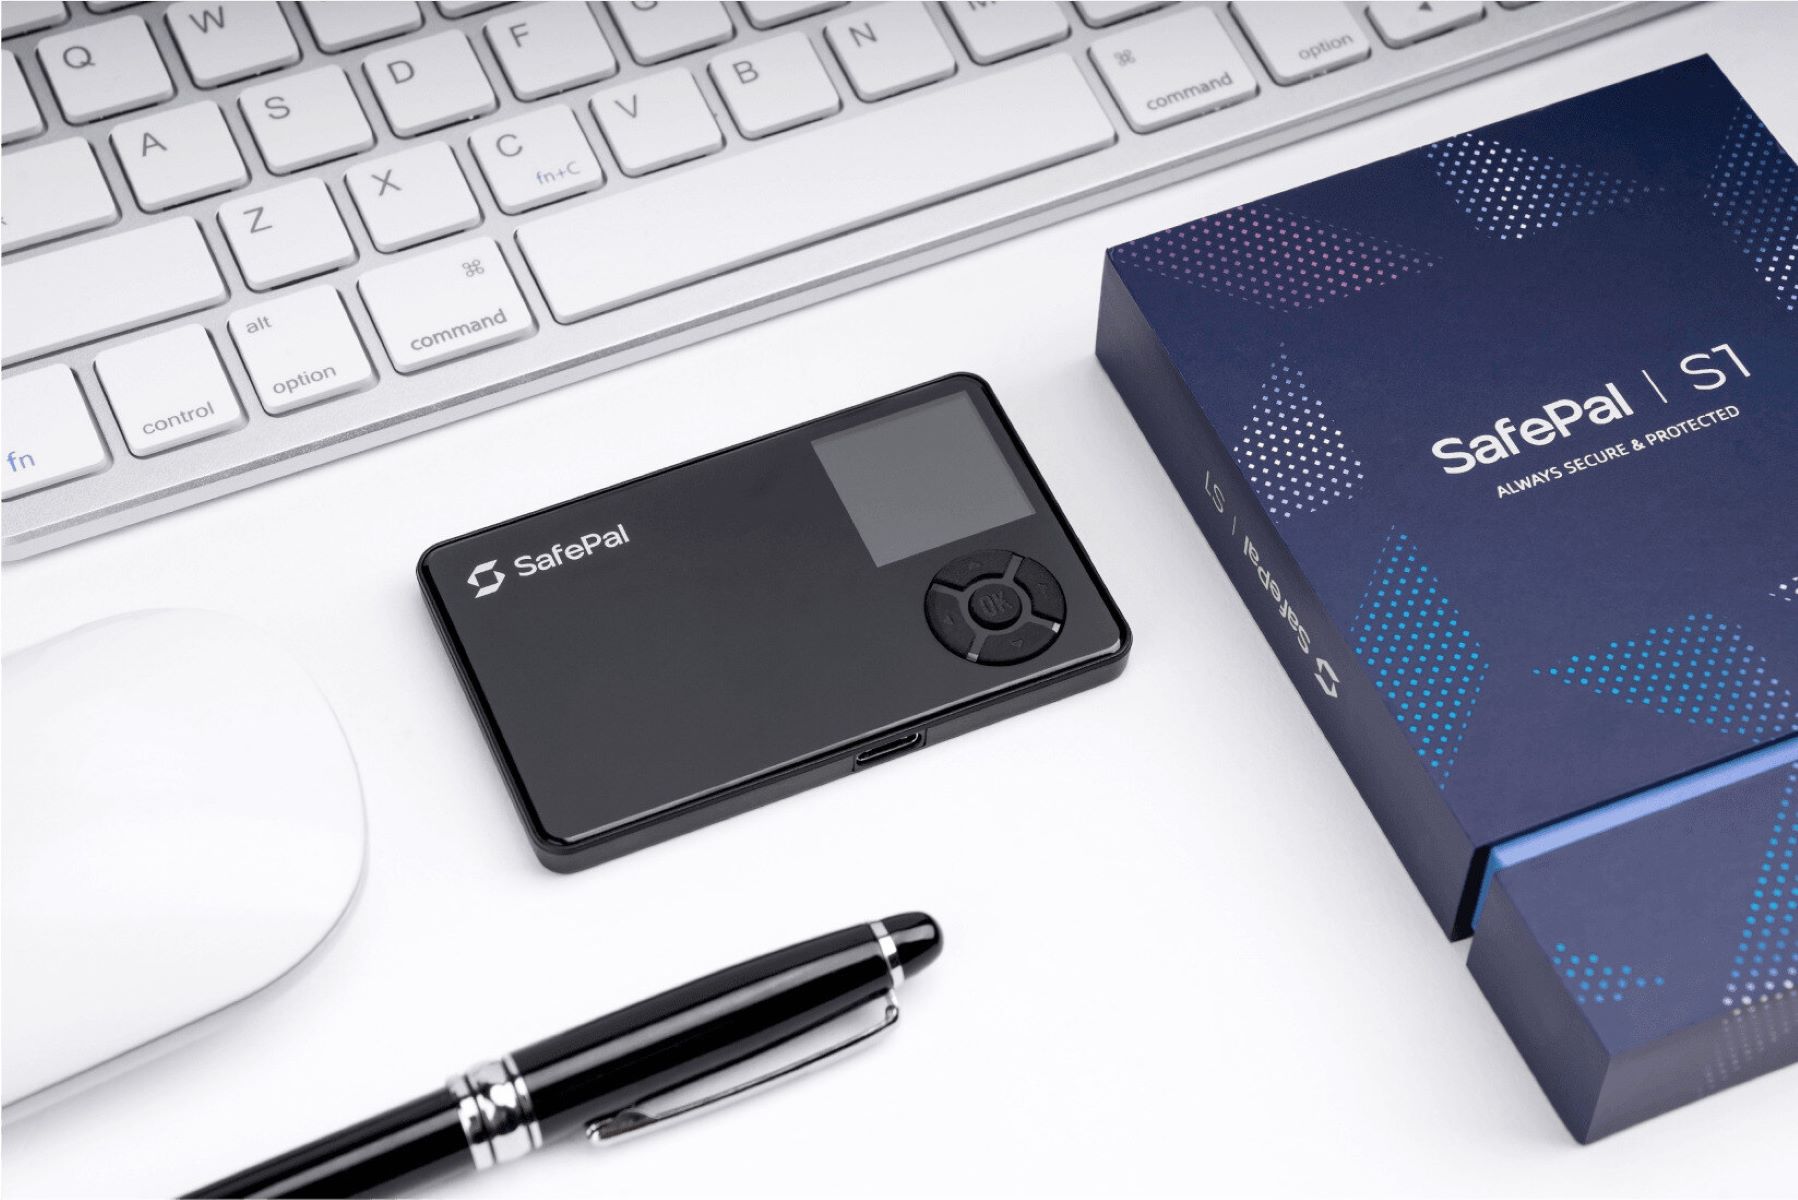 How To Update Safepal Hardware Wallet?